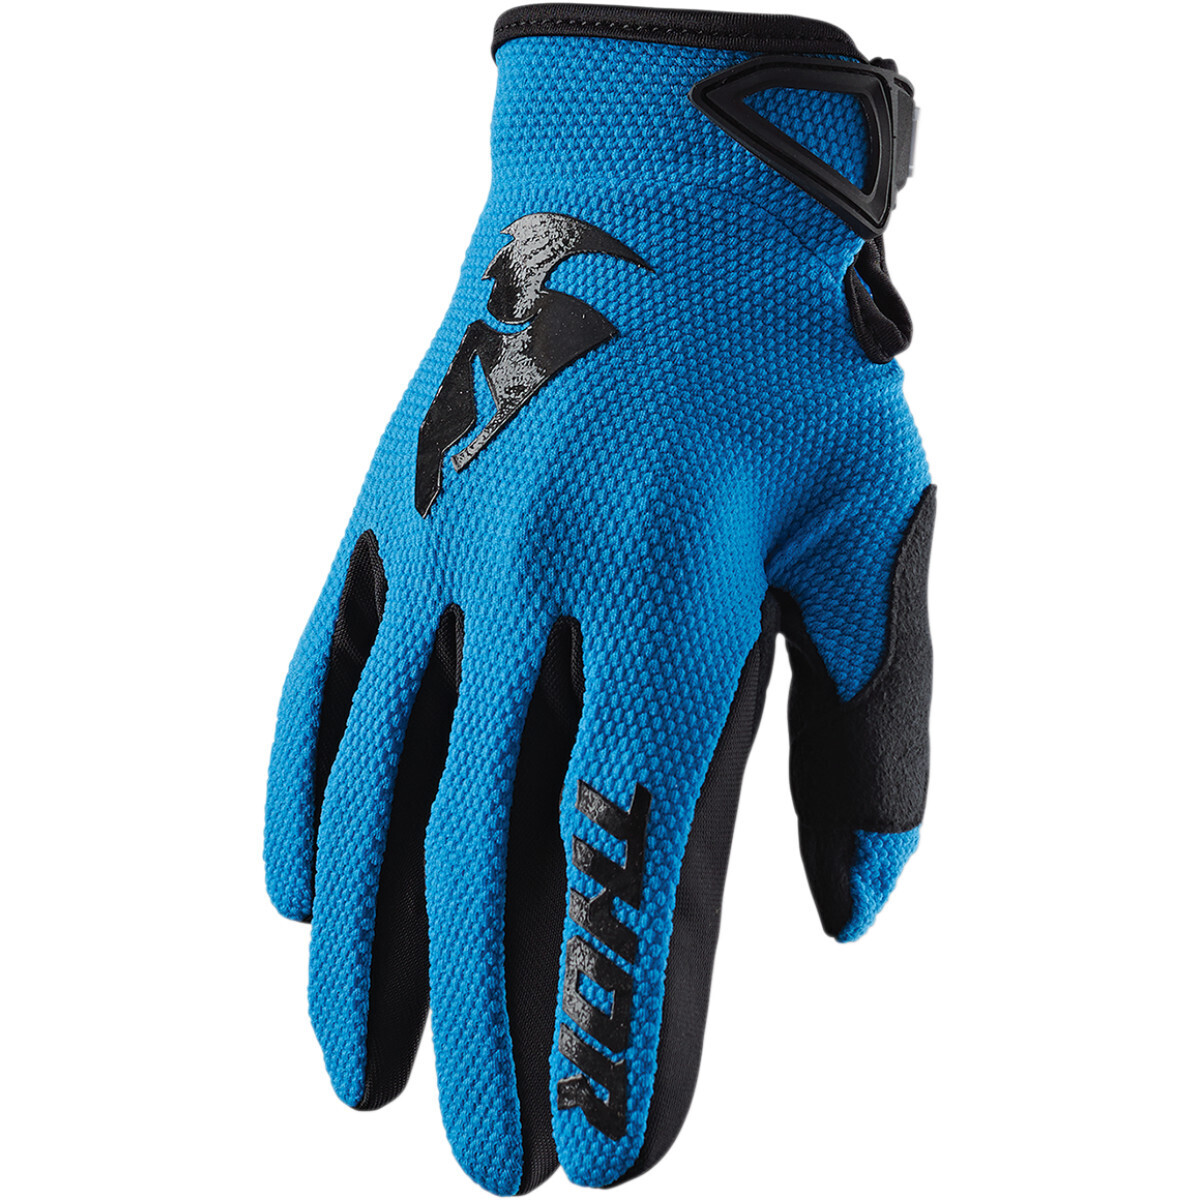 THOR
GLOVE S20 SECTOR BLUE